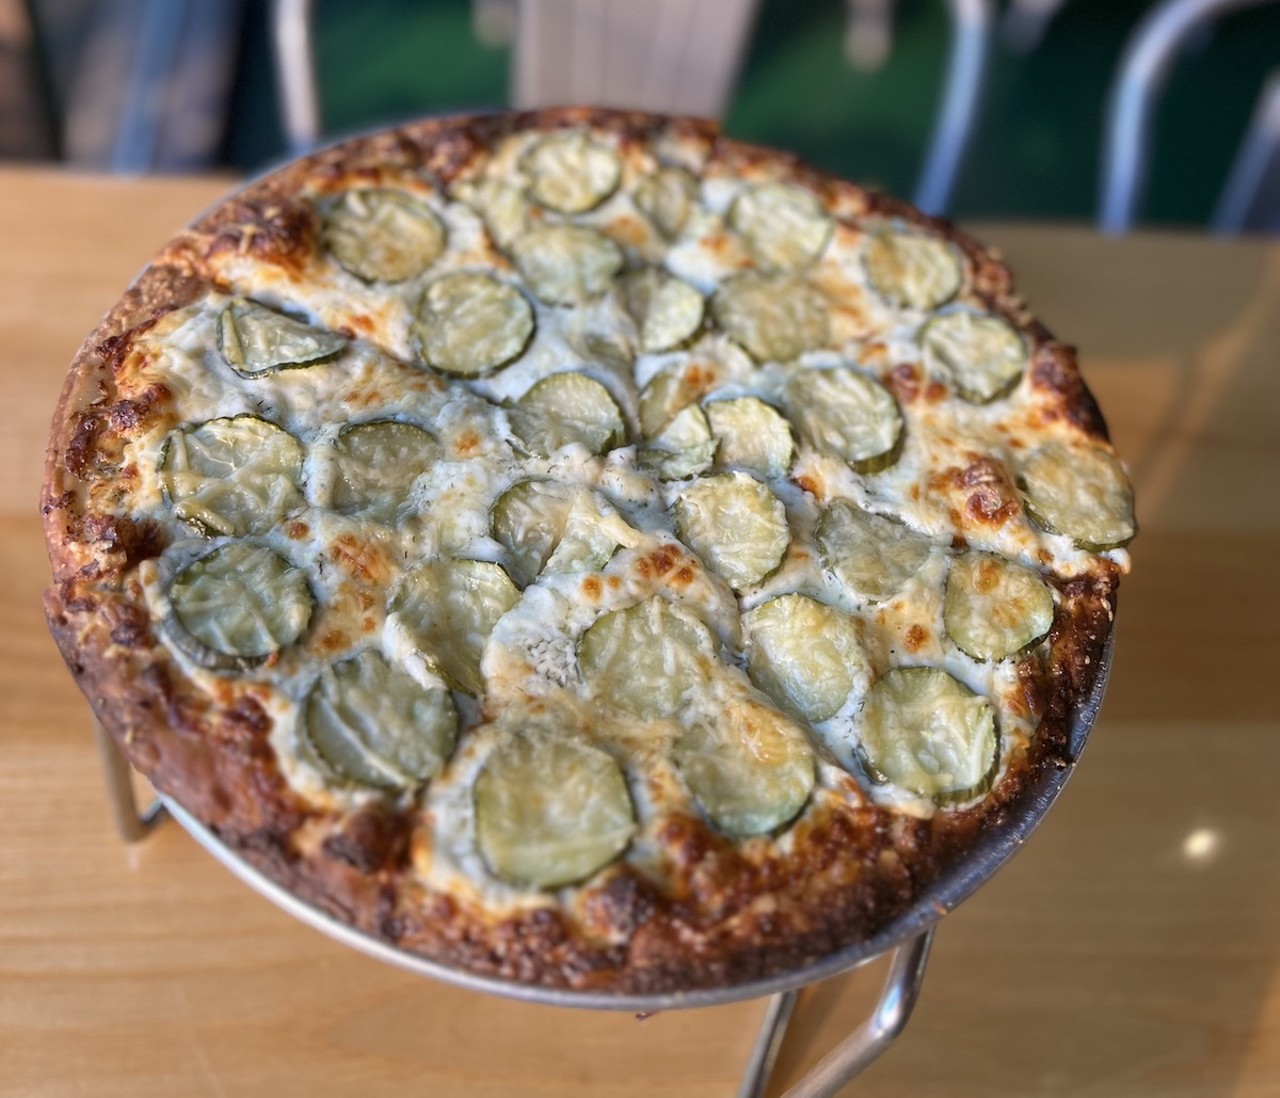 The Gruff
129 E. Second St., Covington
Dill Pickle Pizza: A 12-inch pie with house-prepared creamy dill sauce, fresh house-made dill pickles, mozzarella and shredded parmesan cheeses. You can also upgrade and add on bacon, sausage or steak.